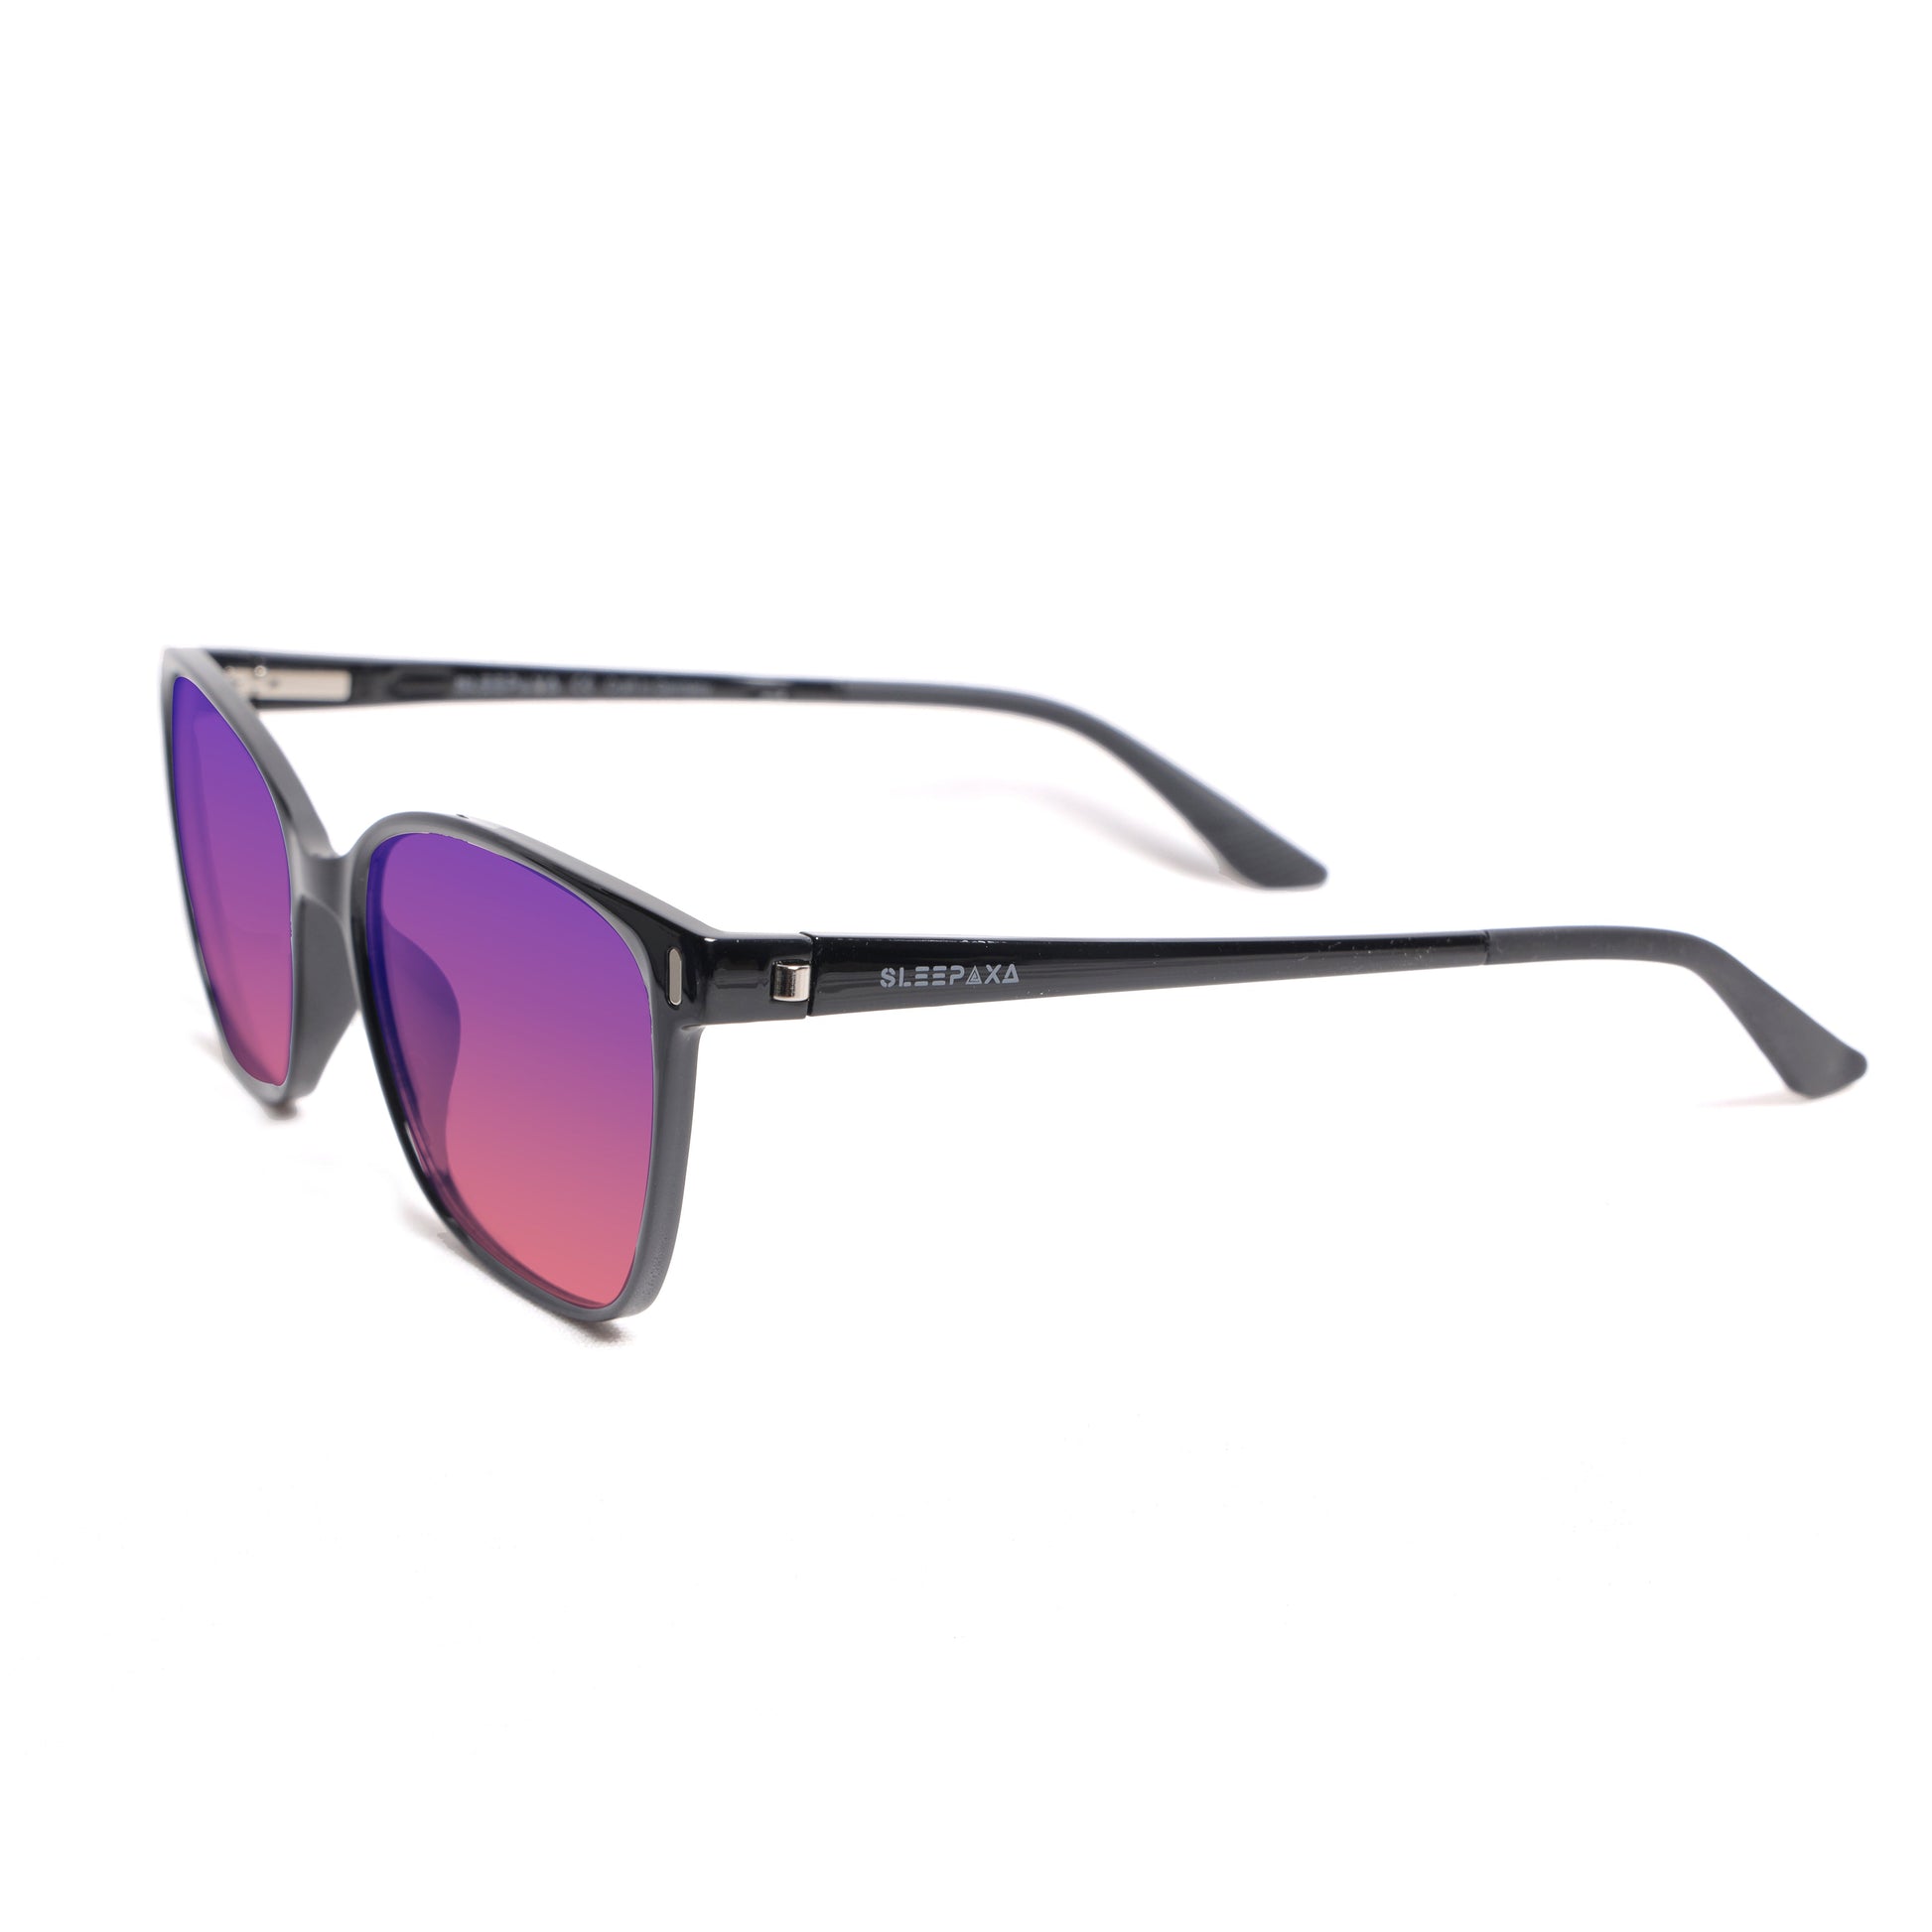 Side View of Sleepaxa Clarte FL41 Migraine & Light Sensitivity glasses with Cat Eye Shape Black frame, rose-tinted lenses, and high-quality tr90 temples for optimal comfort and durability